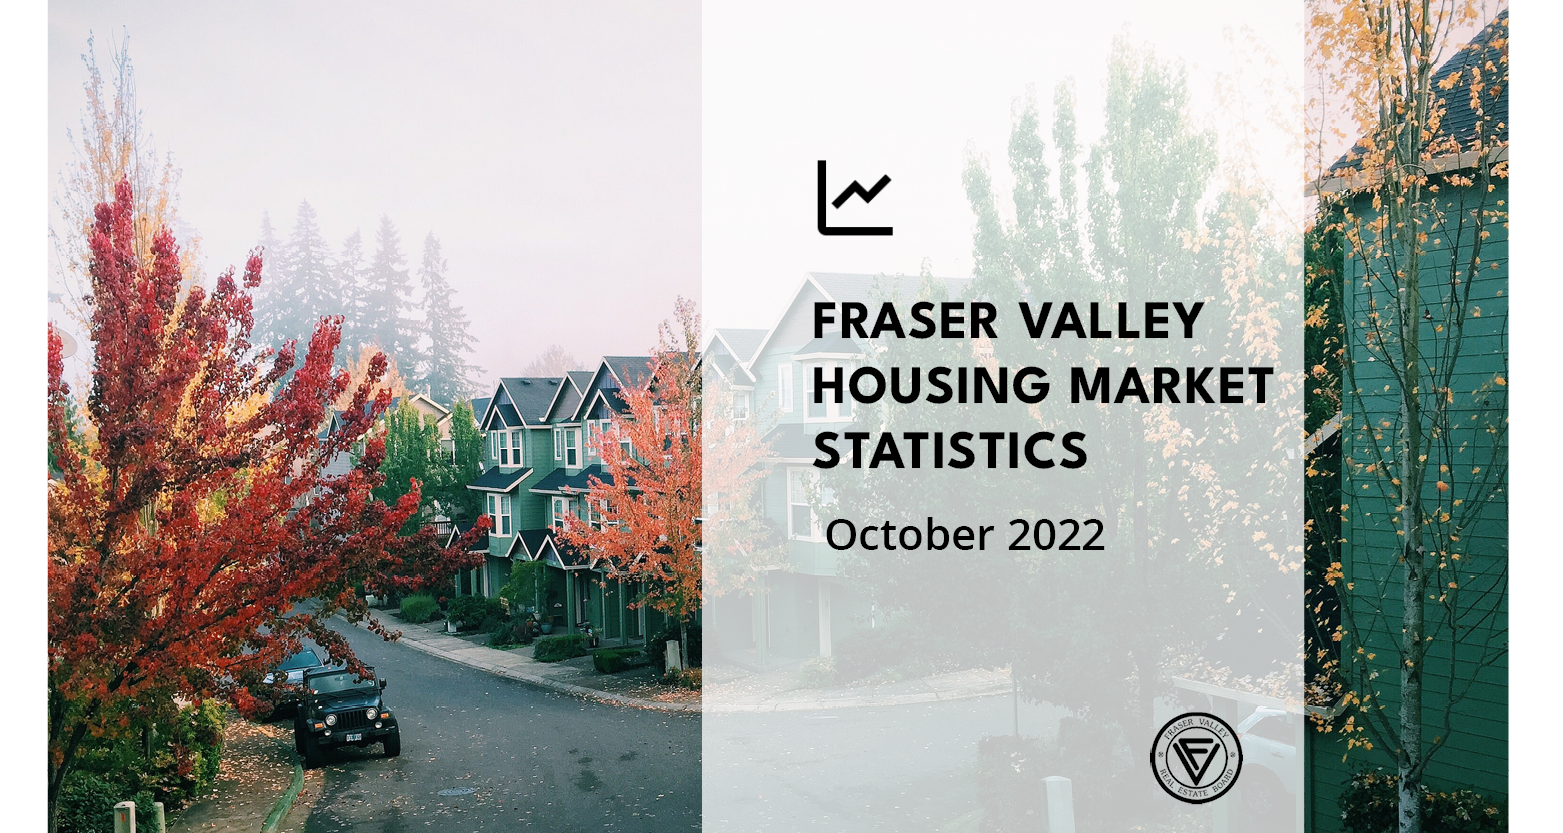 Housing prices remain soft, sales flat, throughout the Fraser Valley